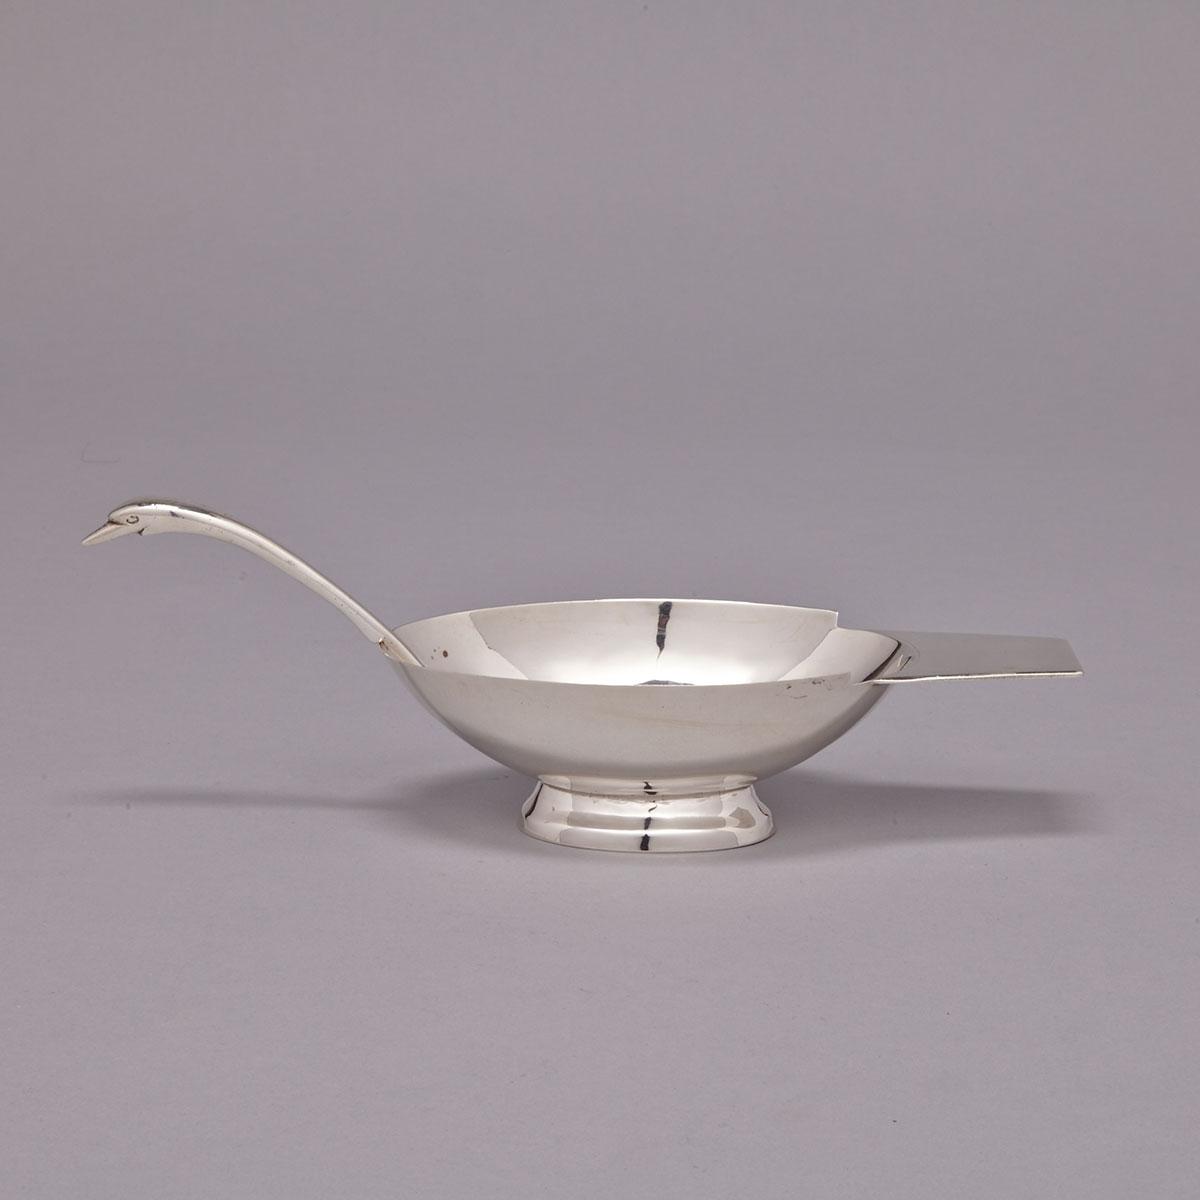 Mexican Silver Bird-Form Sauce Boat and Spoon, Juventino Lopez Reyes, Mexico City, mid-20th century